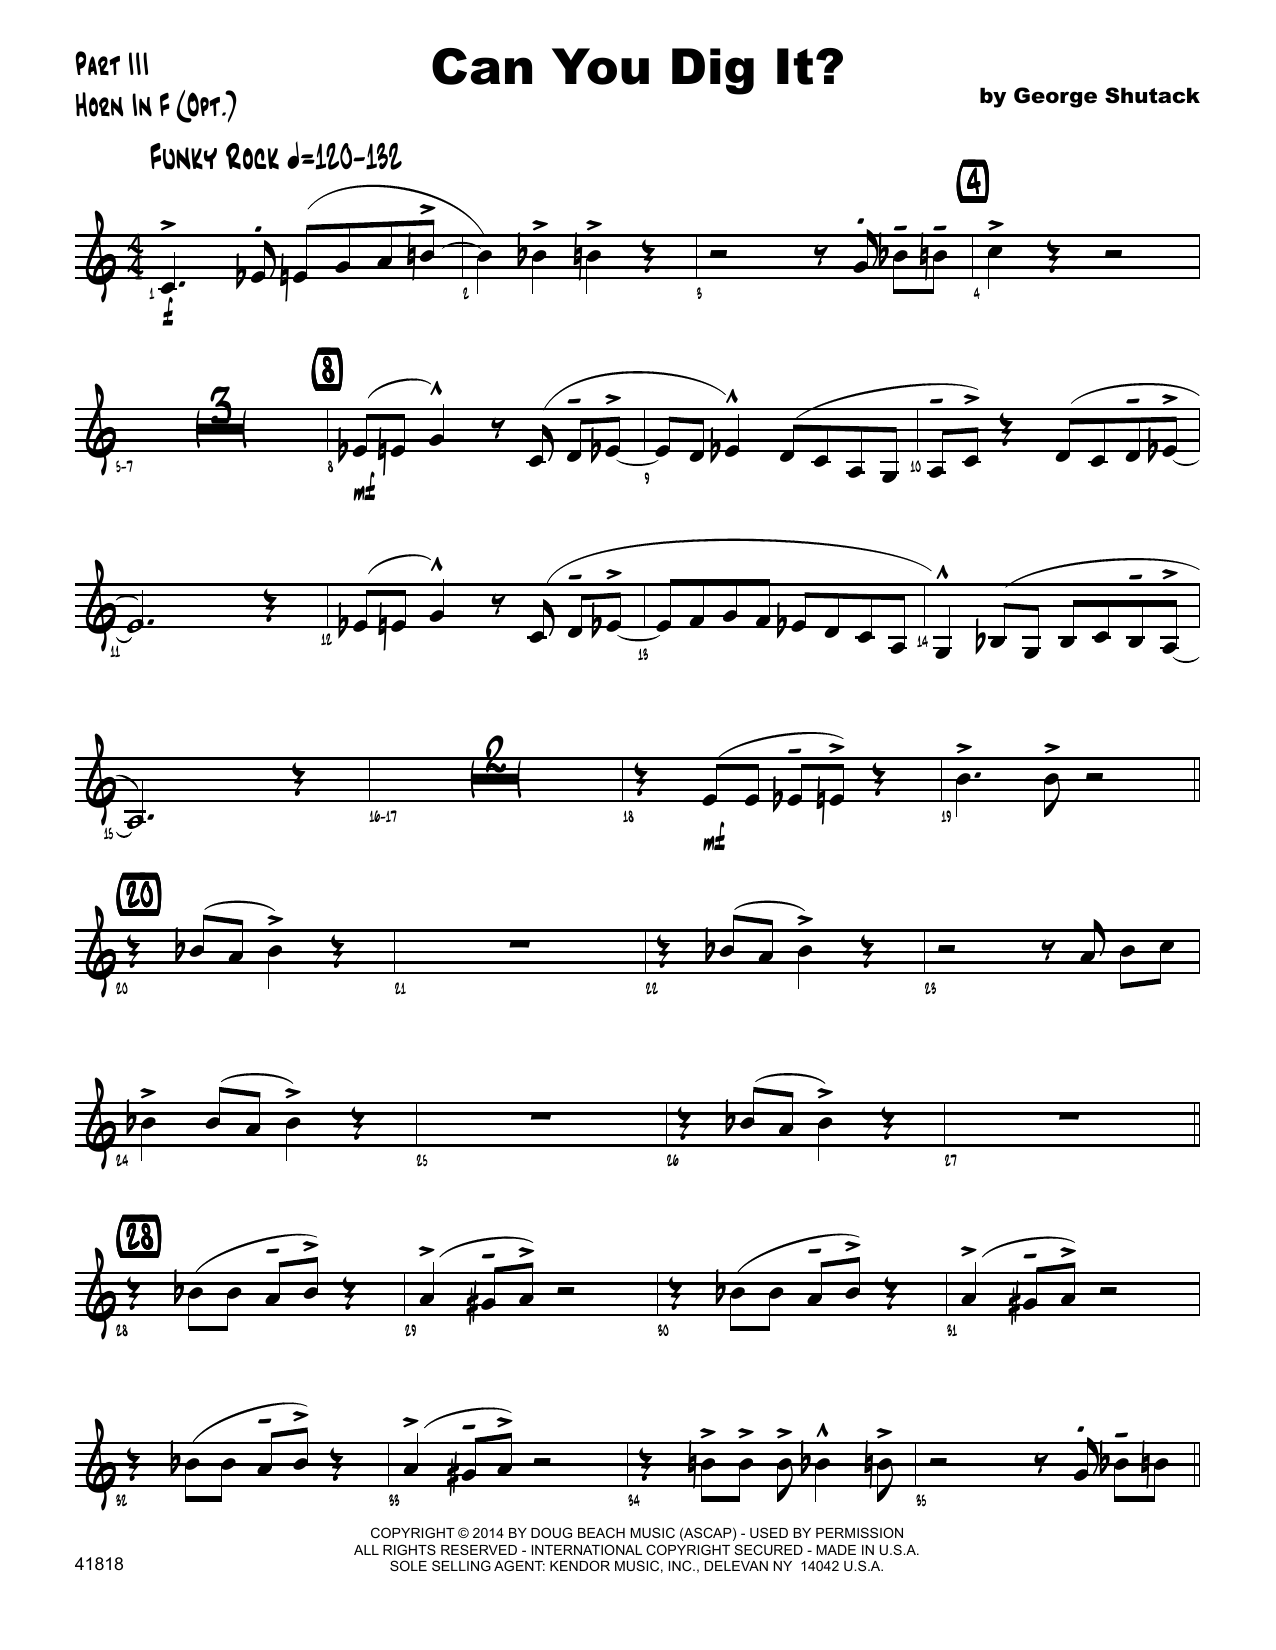 Download George Shutack Can You Dig It? - Horn in F Sheet Music